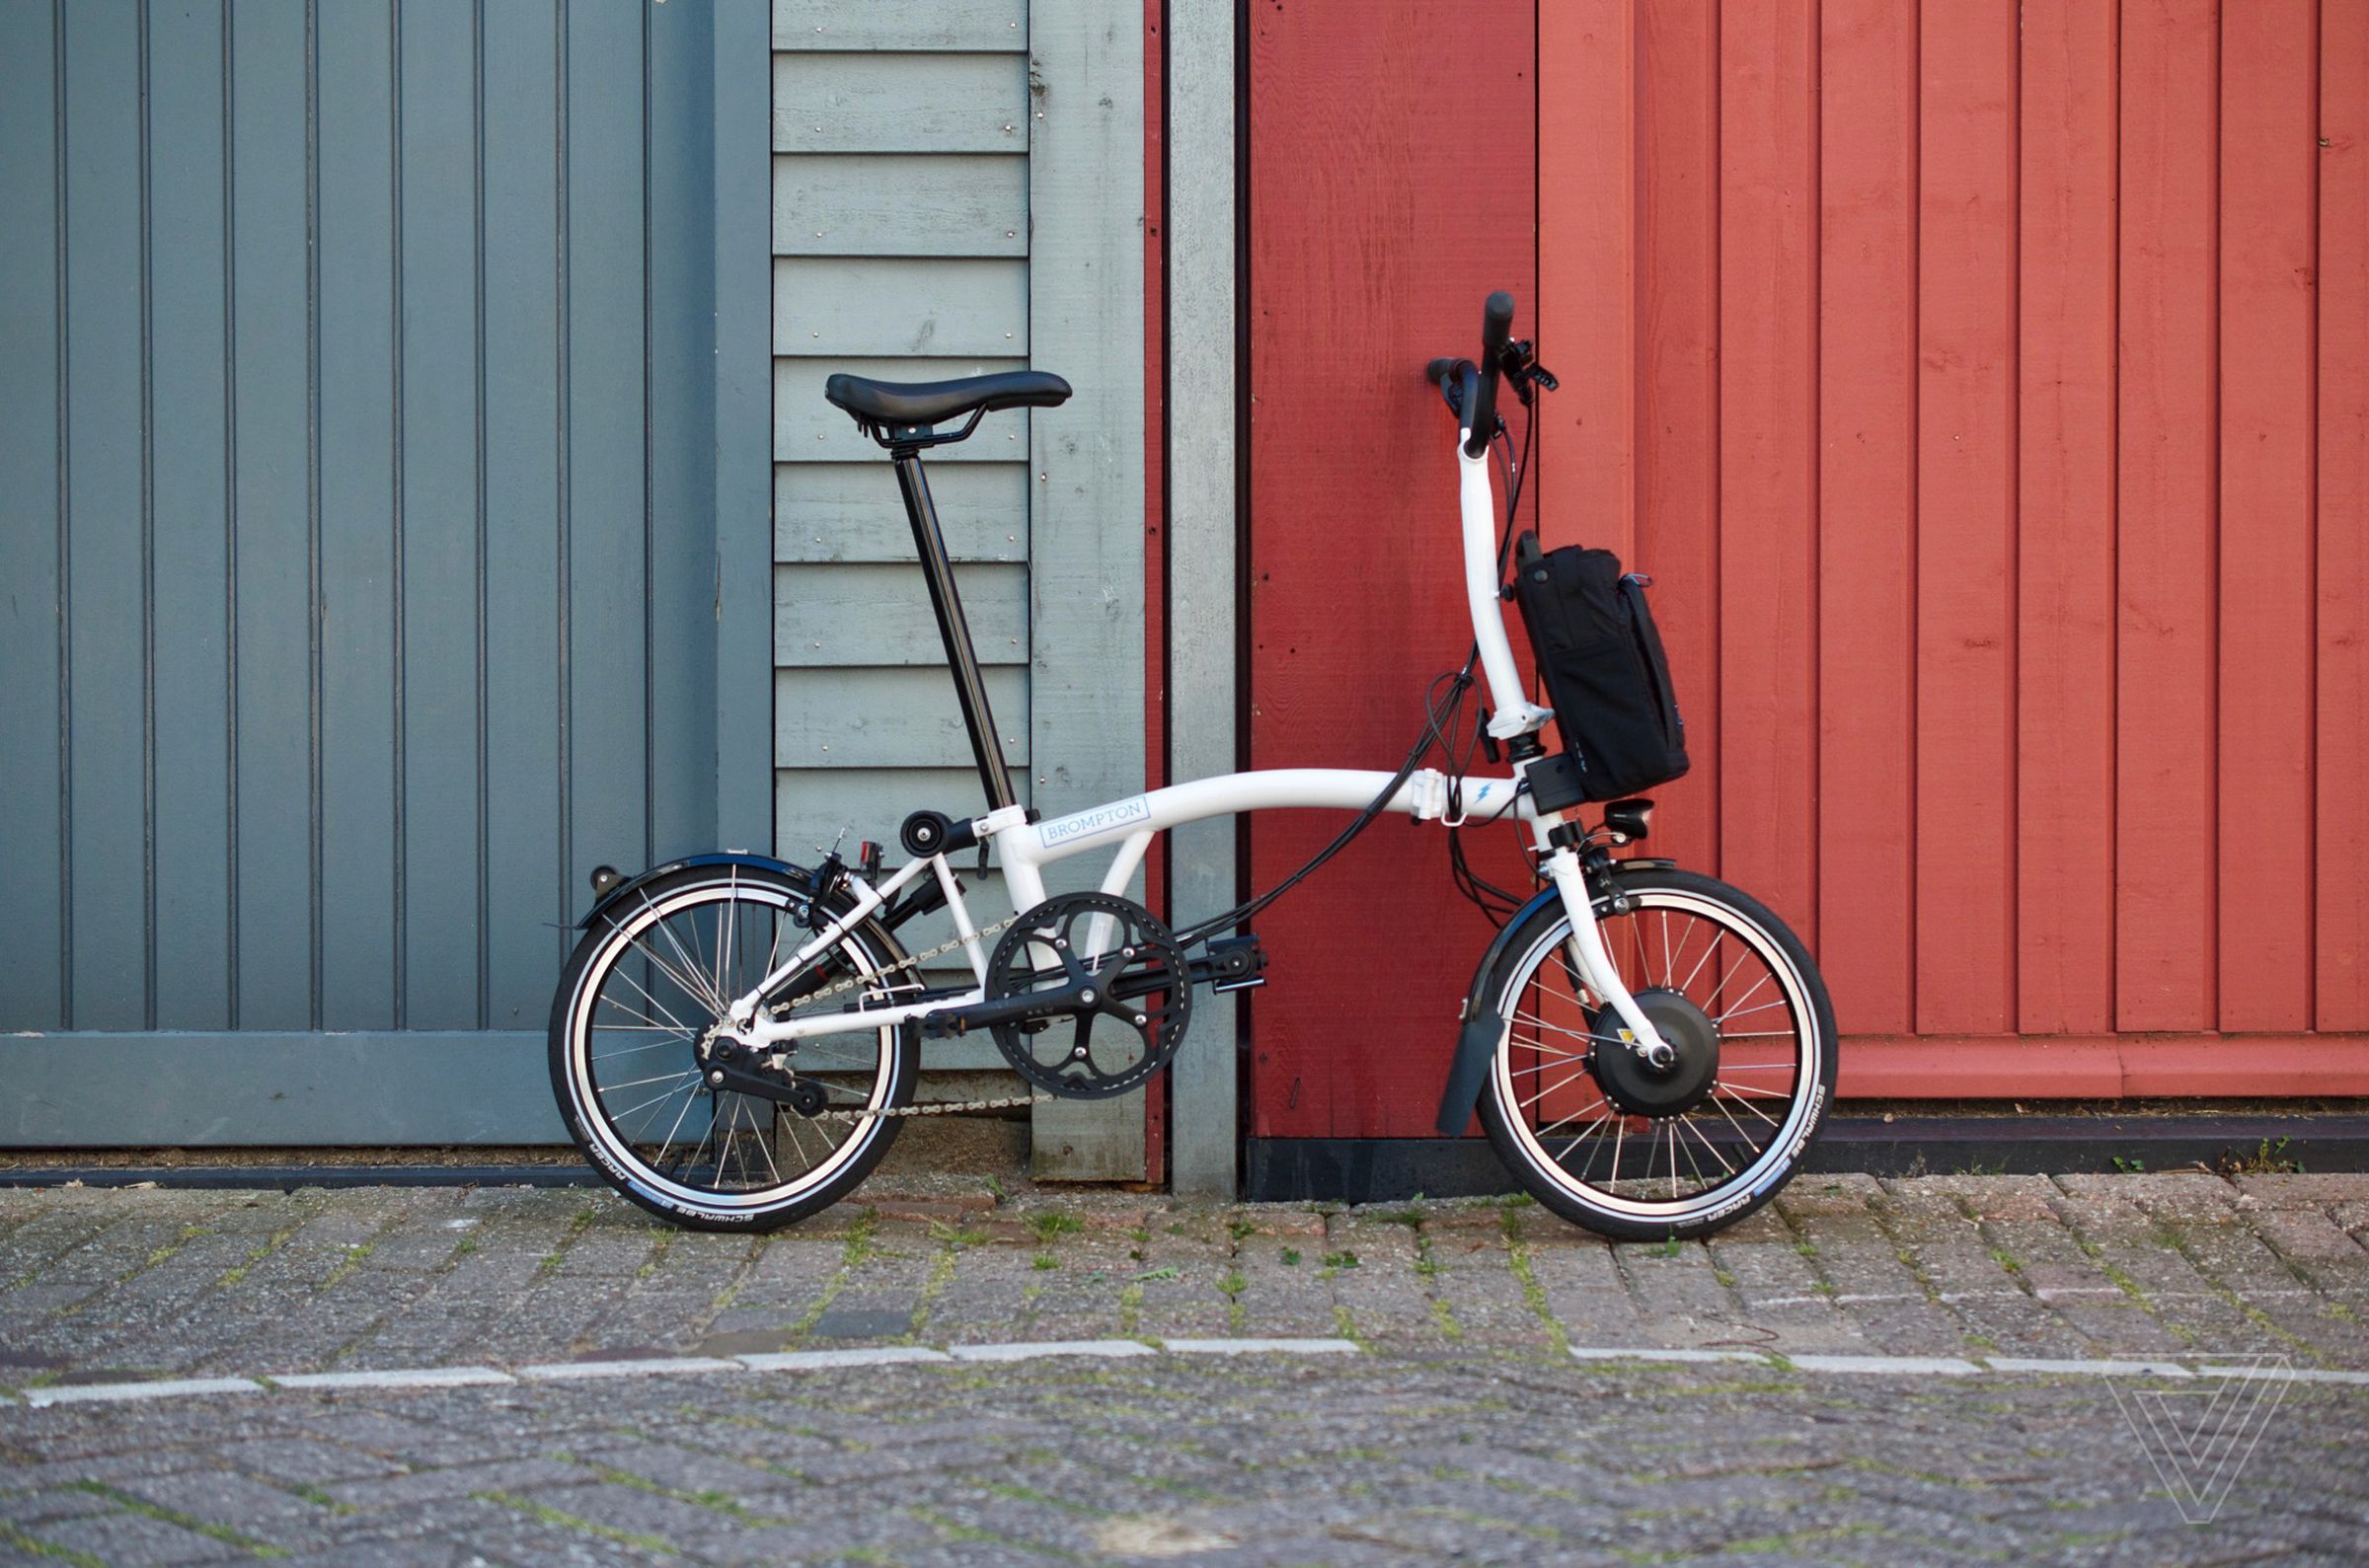 The battery, motor, and control module are all up front, while the backside remains a traditional Brompton.